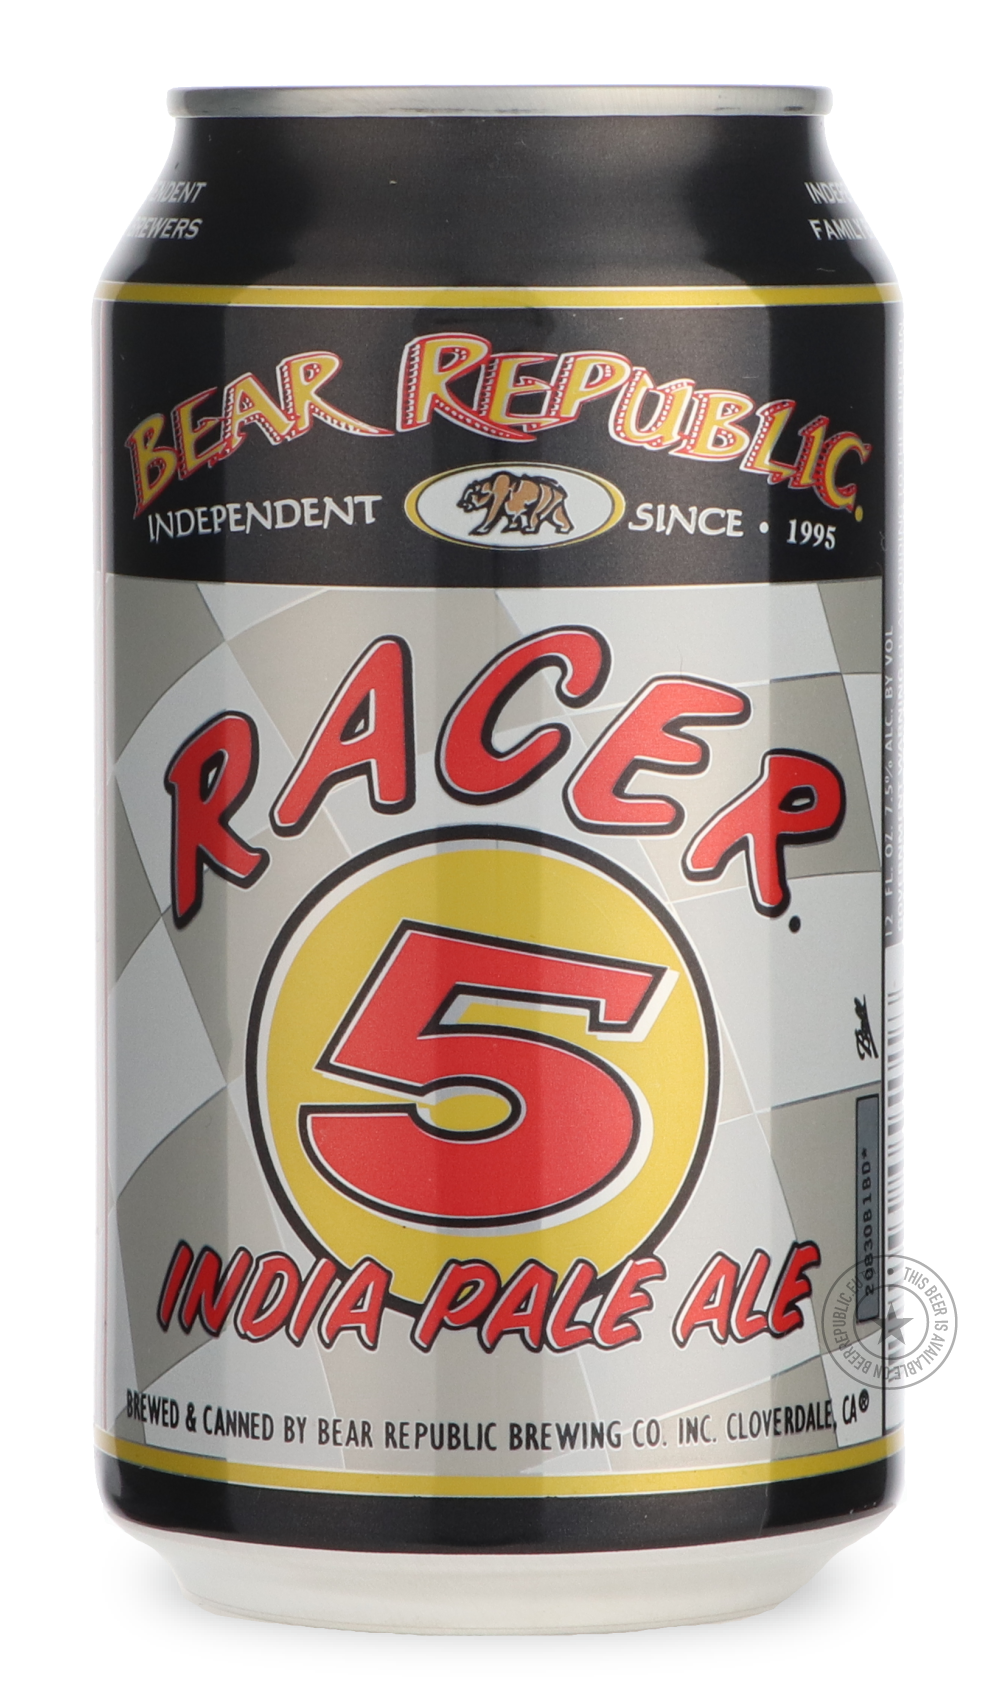 -Bear Republic- Racer 5-IPA- Only @ Beer Republic - The best online beer store for American & Canadian craft beer - Buy beer online from the USA and Canada - Bier online kopen - Amerikaans bier kopen - Craft beer store - Craft beer kopen - Amerikanisch bier kaufen - Bier online kaufen - Acheter biere online - IPA - Stout - Porter - New England IPA - Hazy IPA - Imperial Stout - Barrel Aged - Barrel Aged Imperial Stout - Brown - Dark beer - Blond - Blonde - Pilsner - Lager - Wheat - Weizen - Amber - Barley Wi